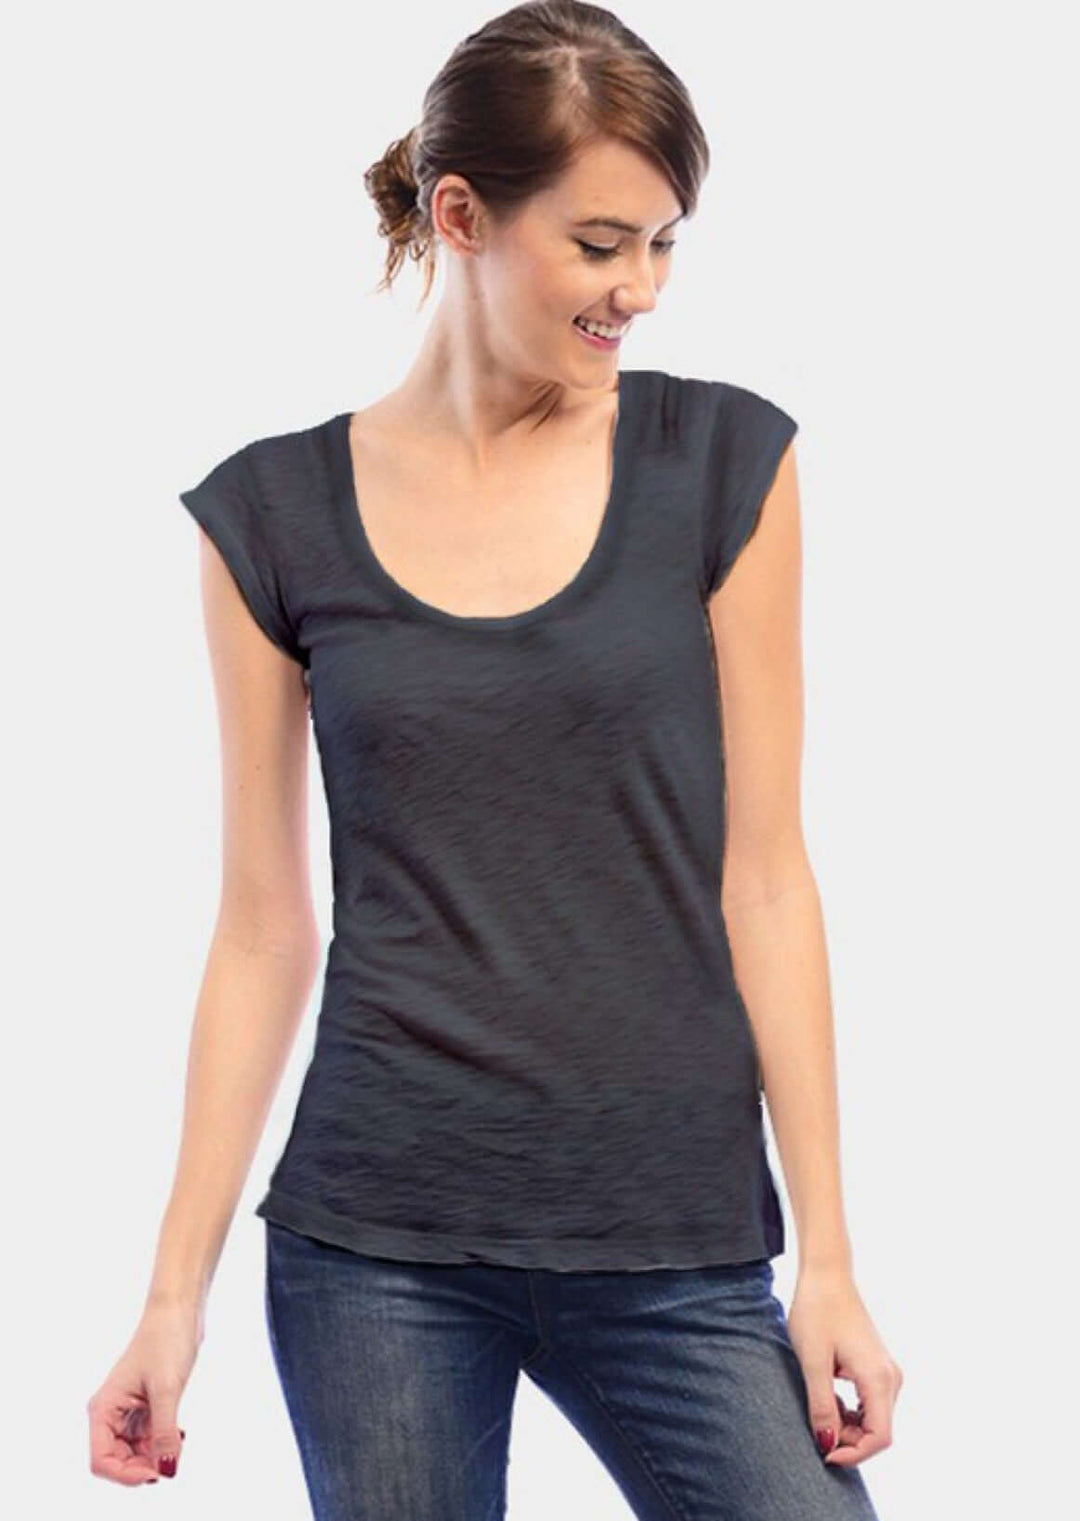 Made in USA Women's Scoop Neck Basic Garment Dyed Cotton Tee T-Shirt with Shirring at Shoulder in Dark Grey | Classy Cozy Cool Made in America Boutique